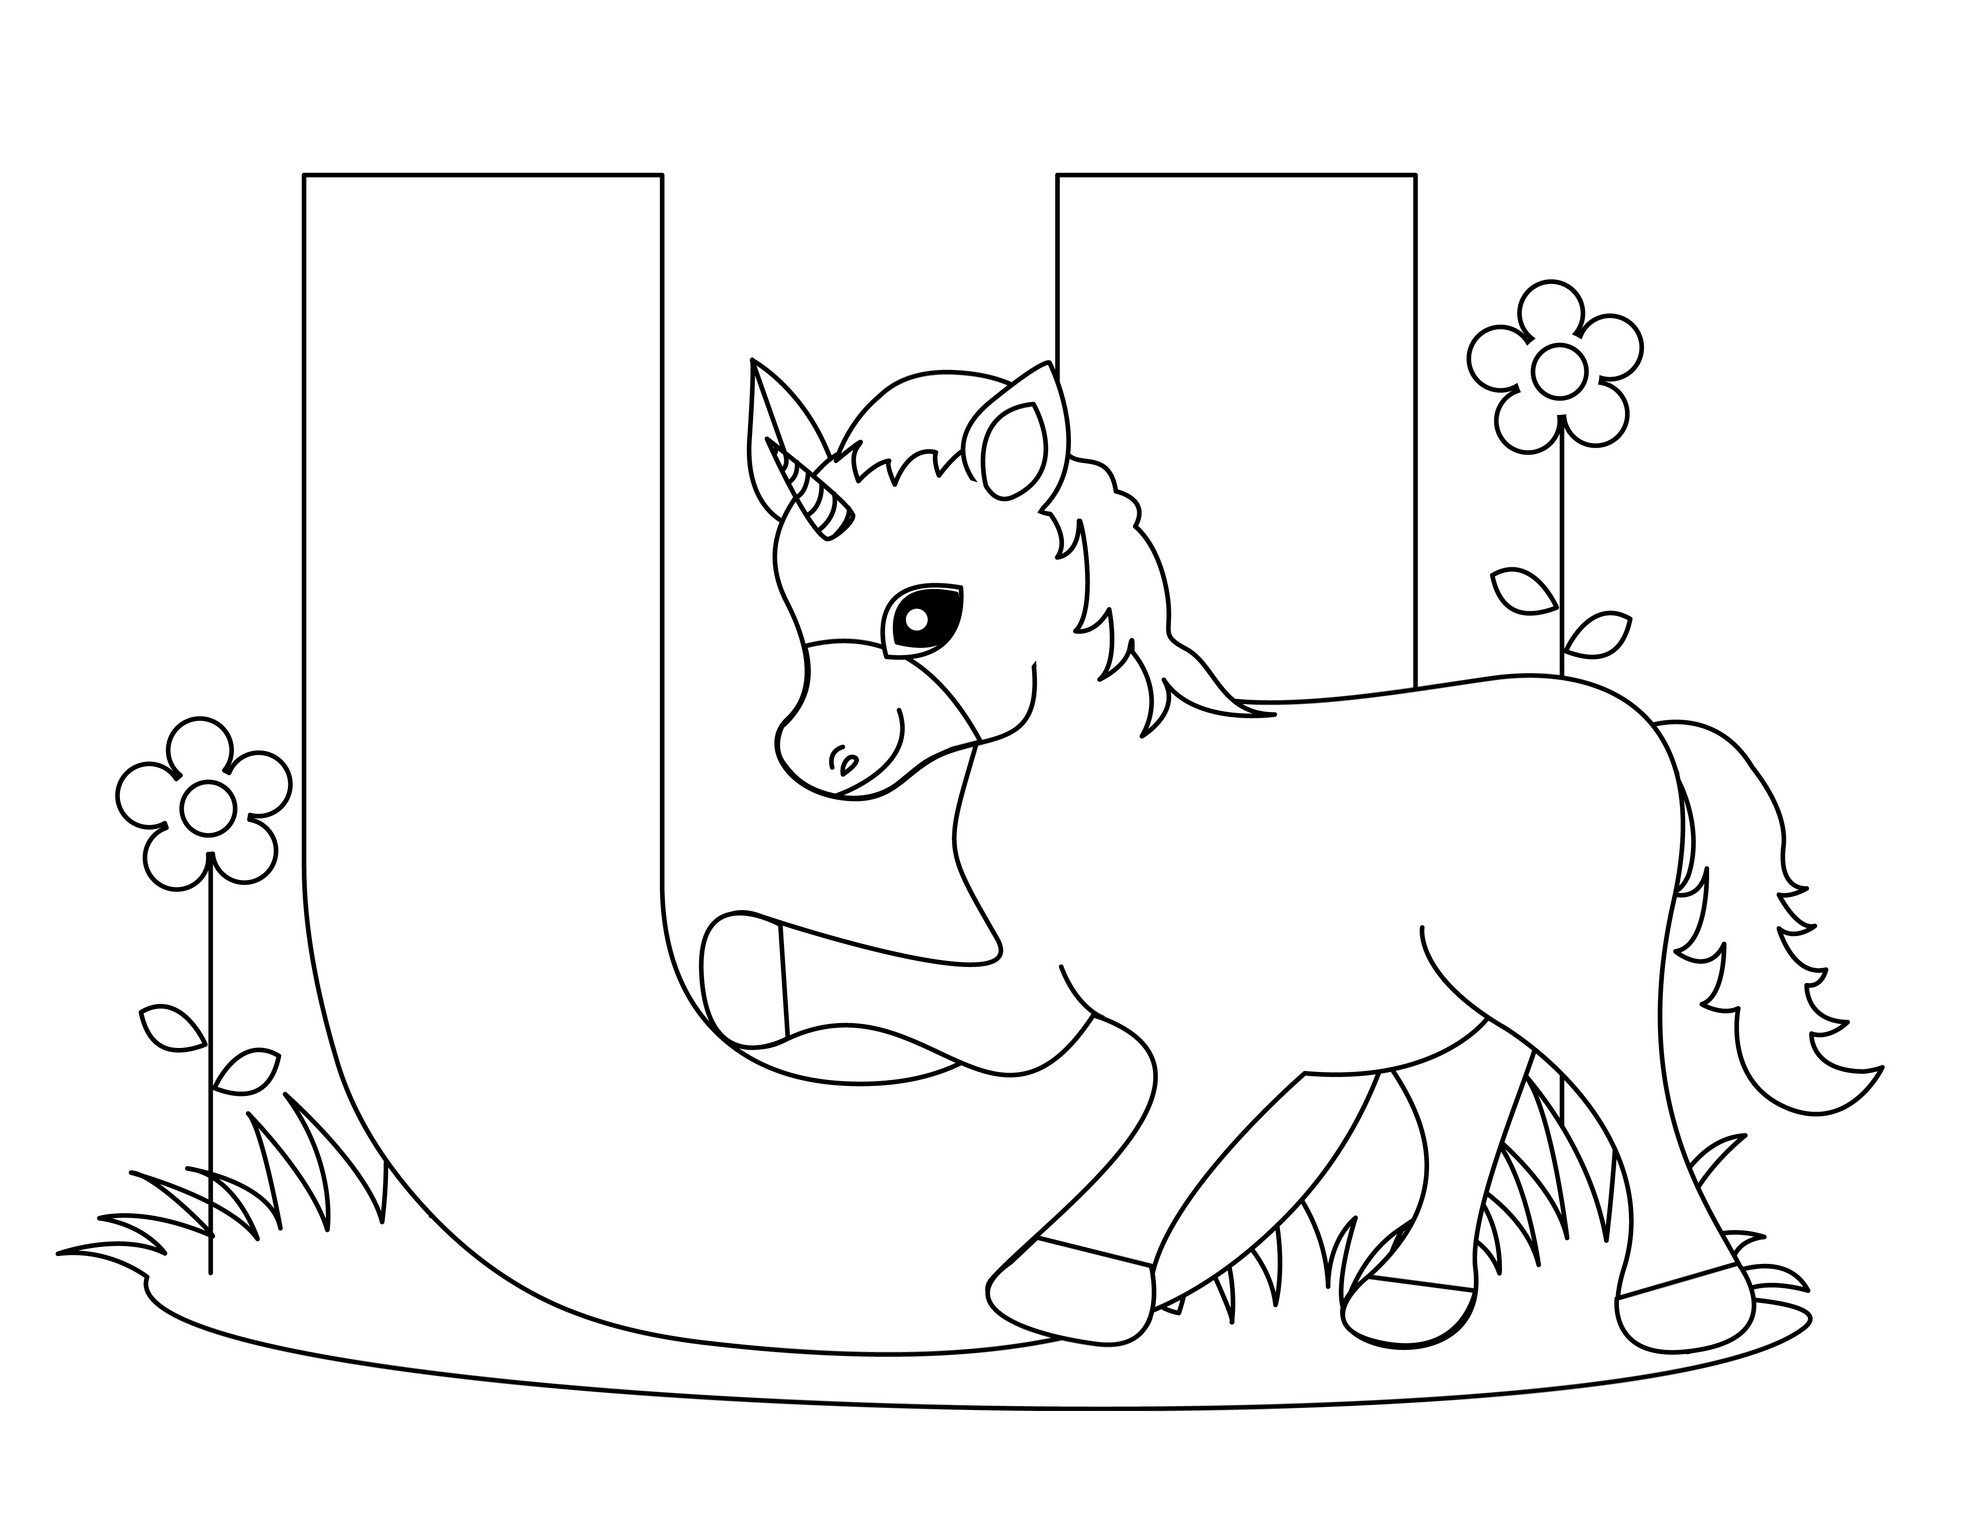  Free Coloring Pages Alphabet 5